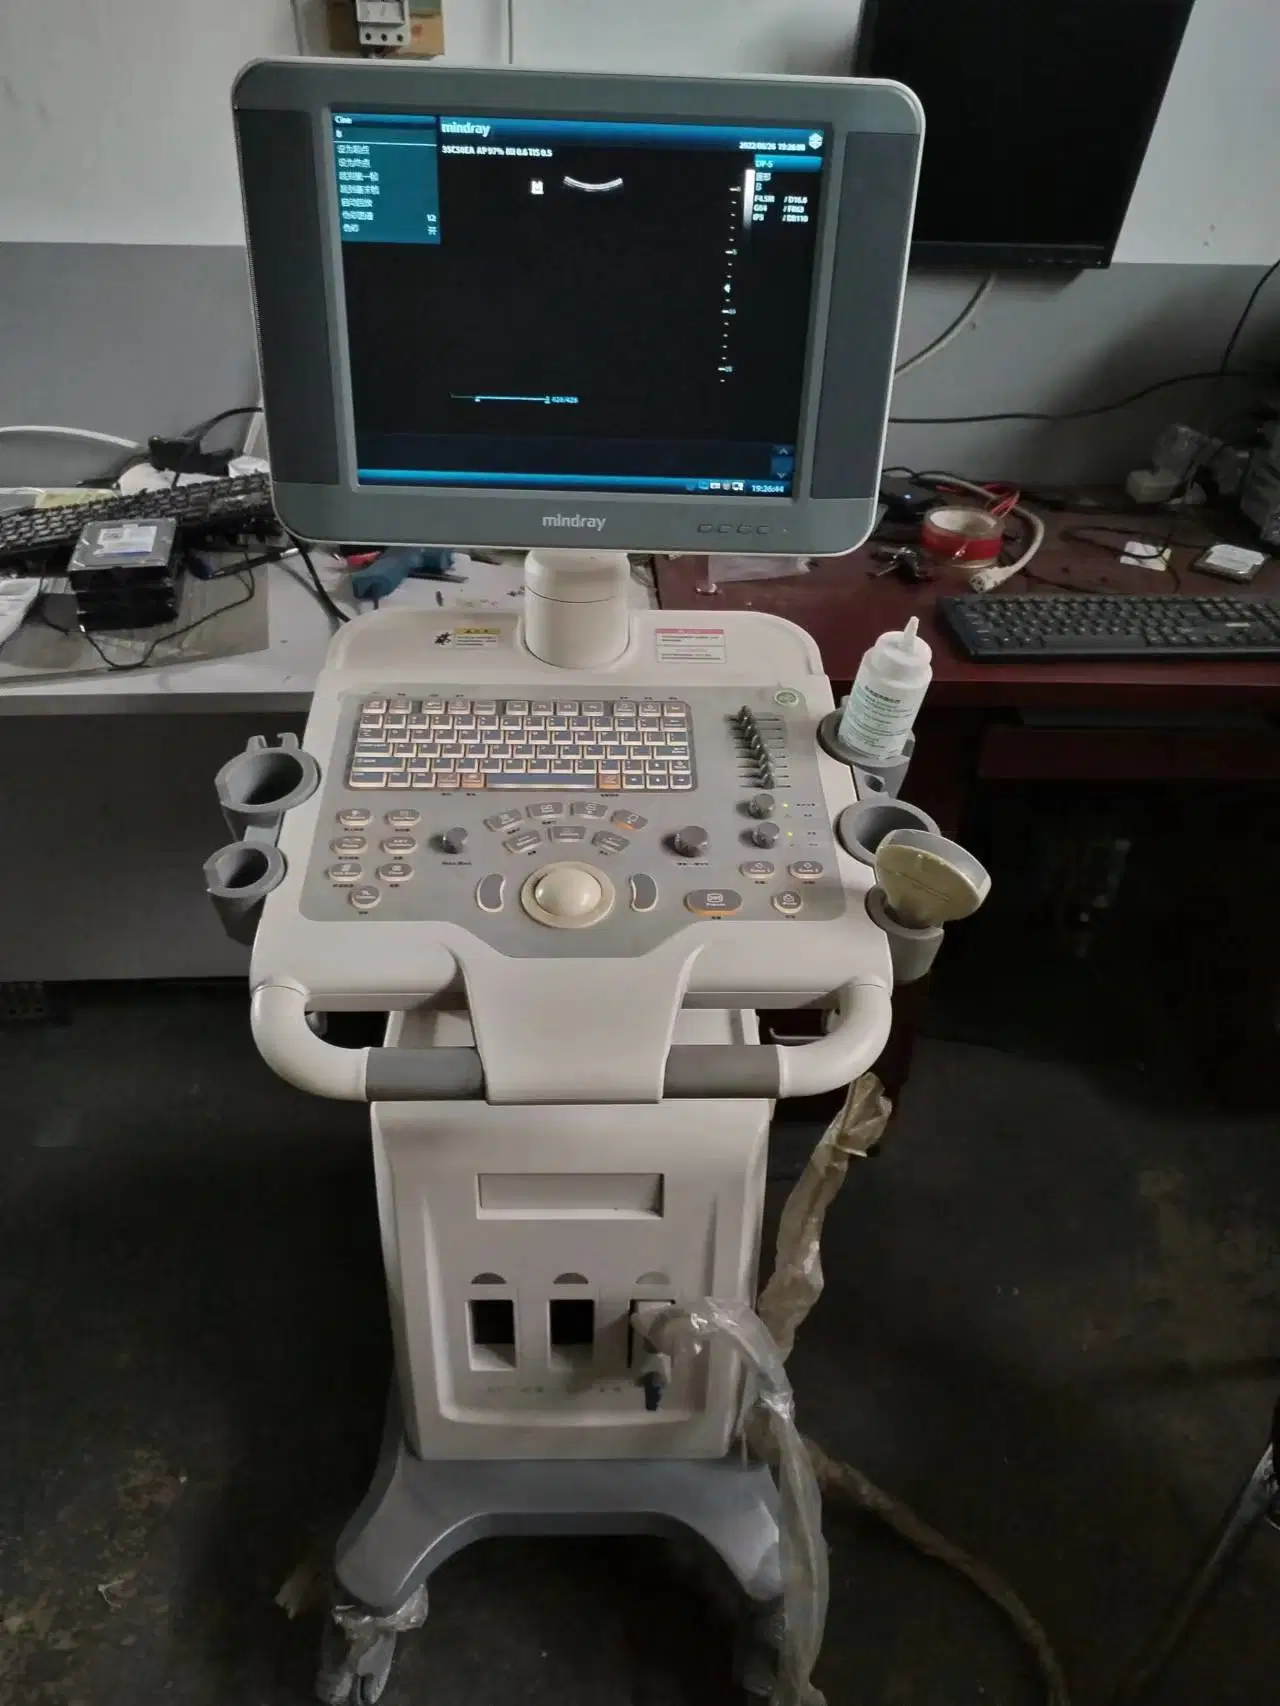 Used Mindray Dp-5 Trolley Ultrasound Second Hand Ultrasound Mindray Ultrasound